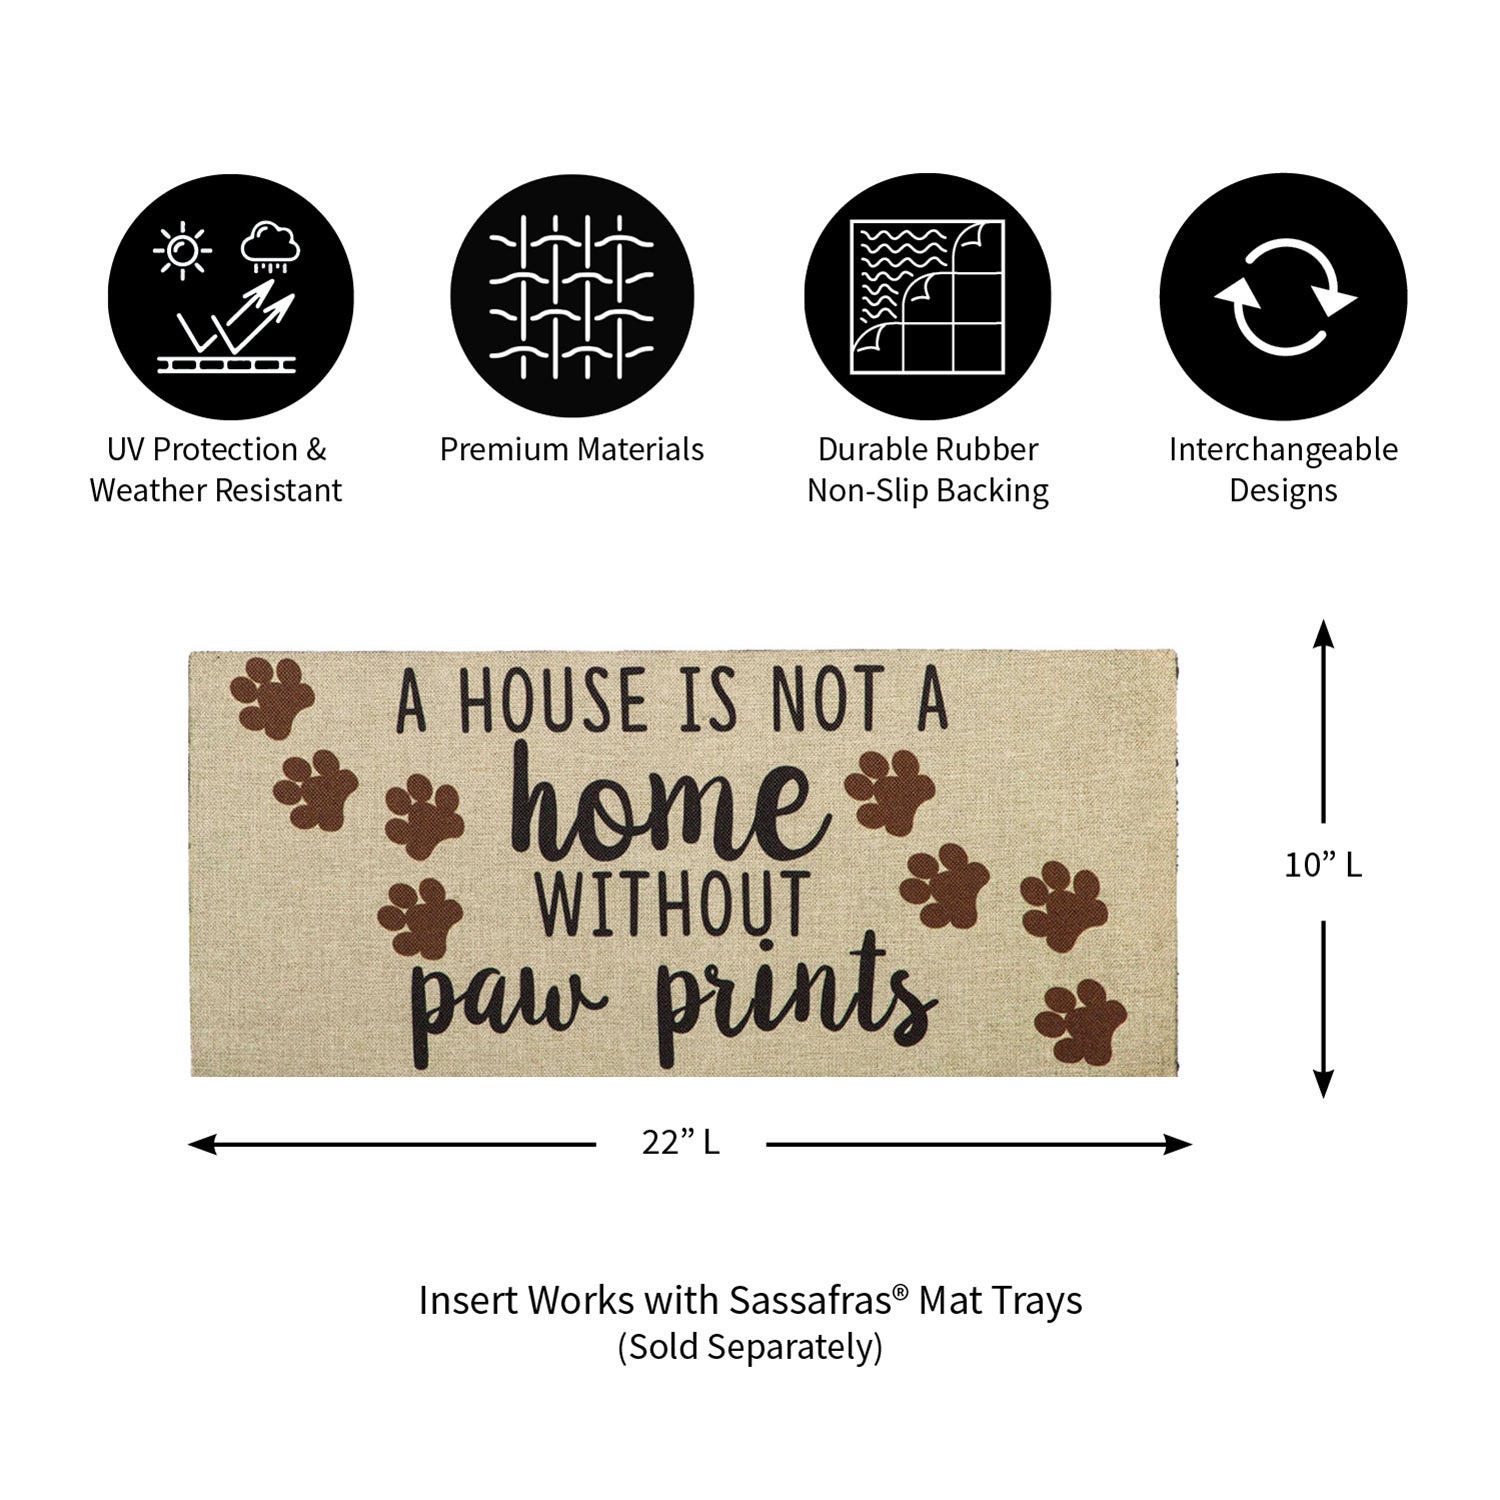 A House is Not a Home Without Paw Prints Burlap Sassafras Switch Mat, 22" x 10"